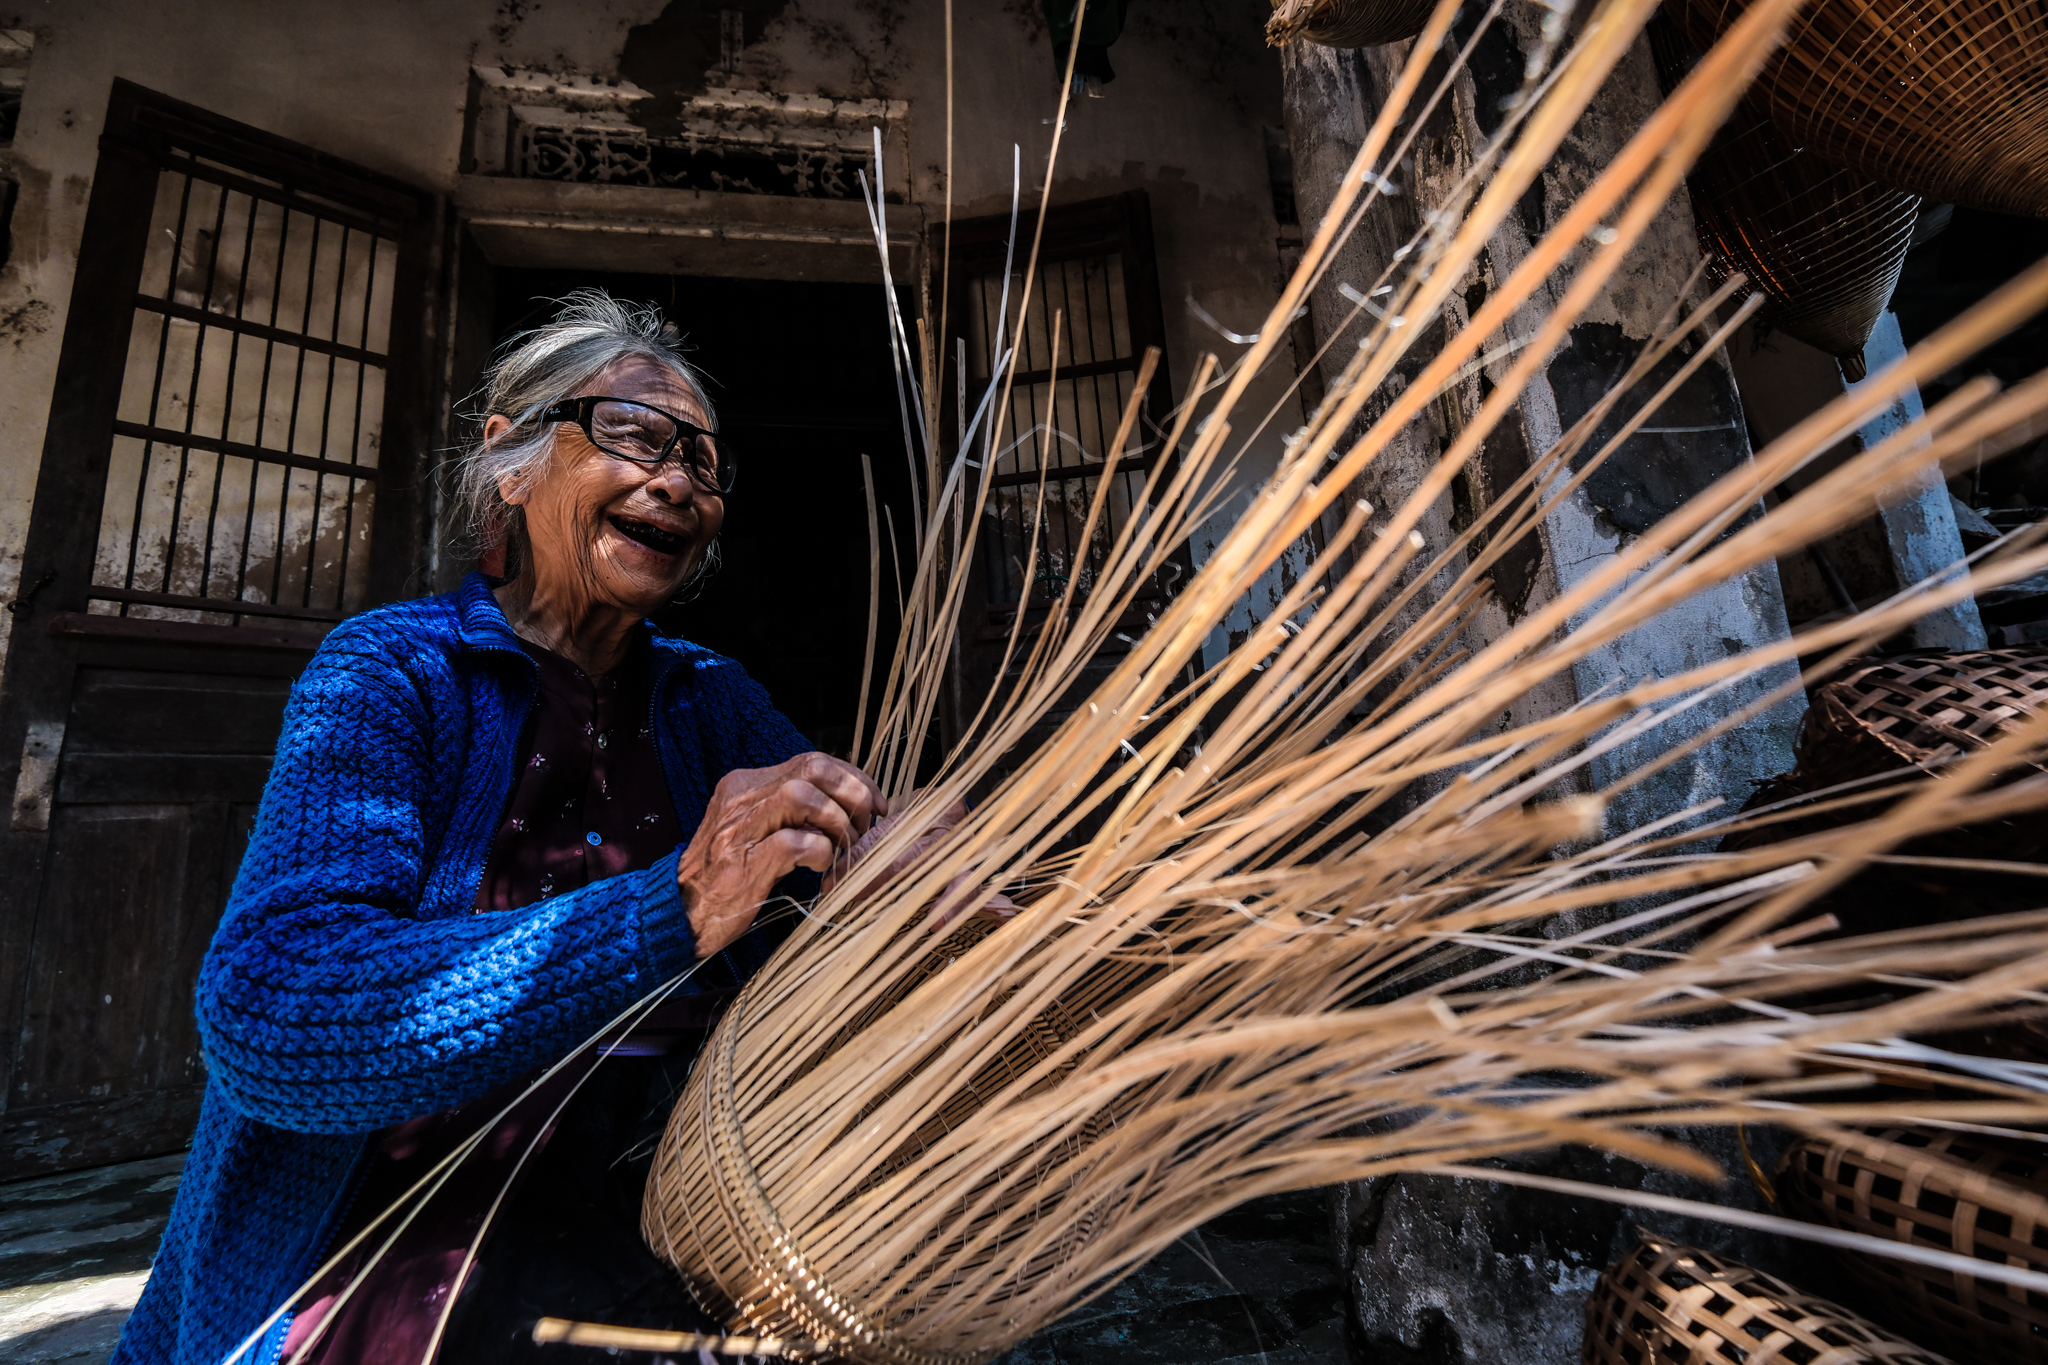 Pham Thi Lap, 91, has been doing the craft for over 80 years. Photo: Nam Tran / Tuoi Tre News